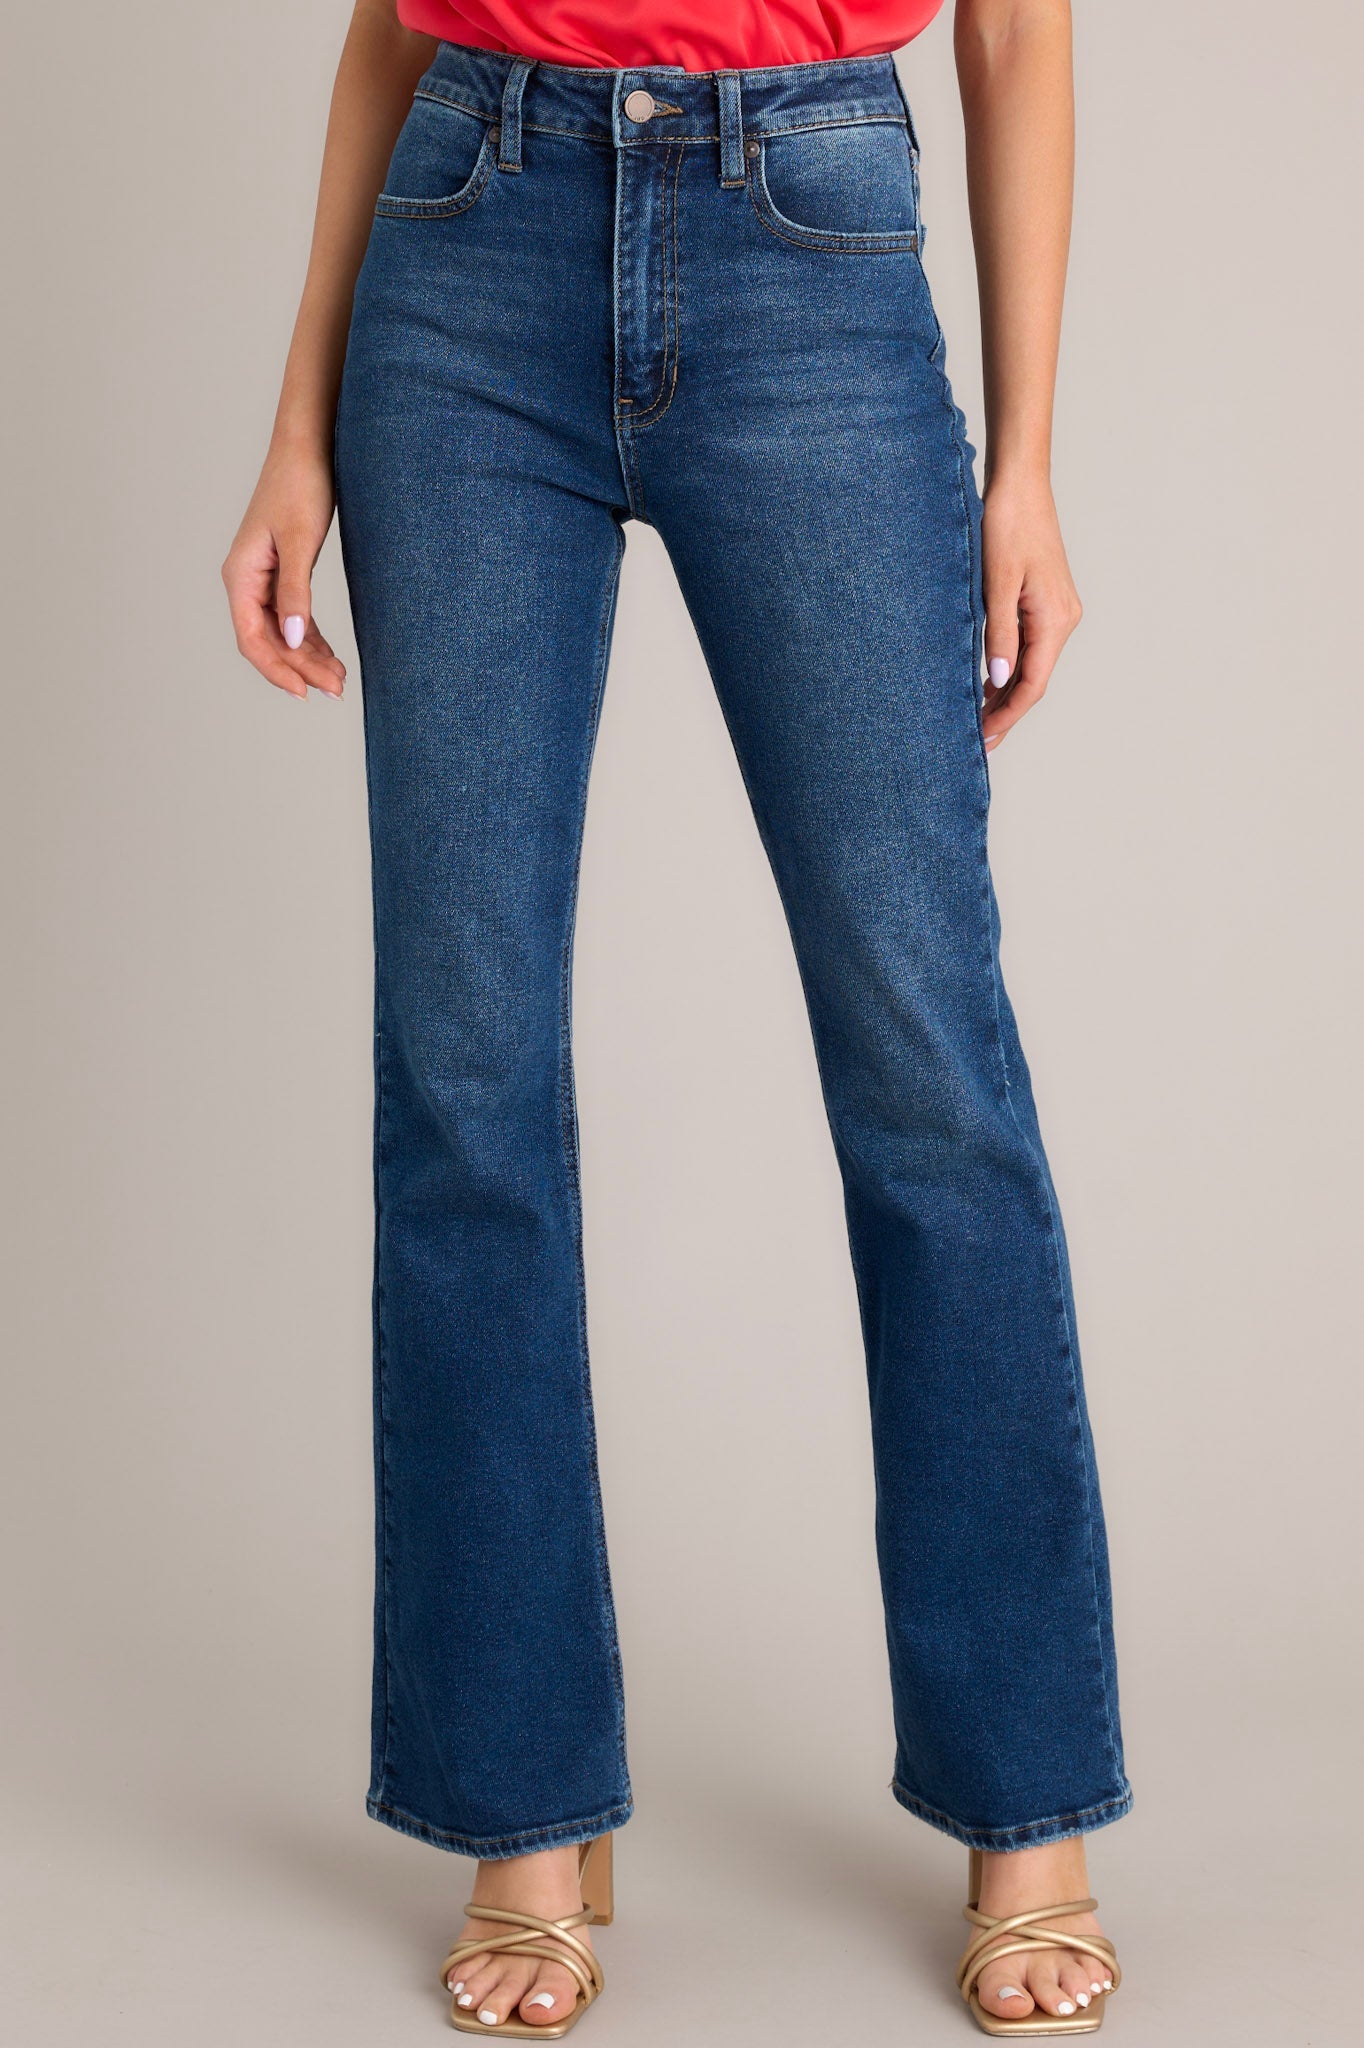 Front view of jeans featuring a high waisted fit, functional pockets on the front and back, belt loops, a zipper and button closure, and a flared out style.